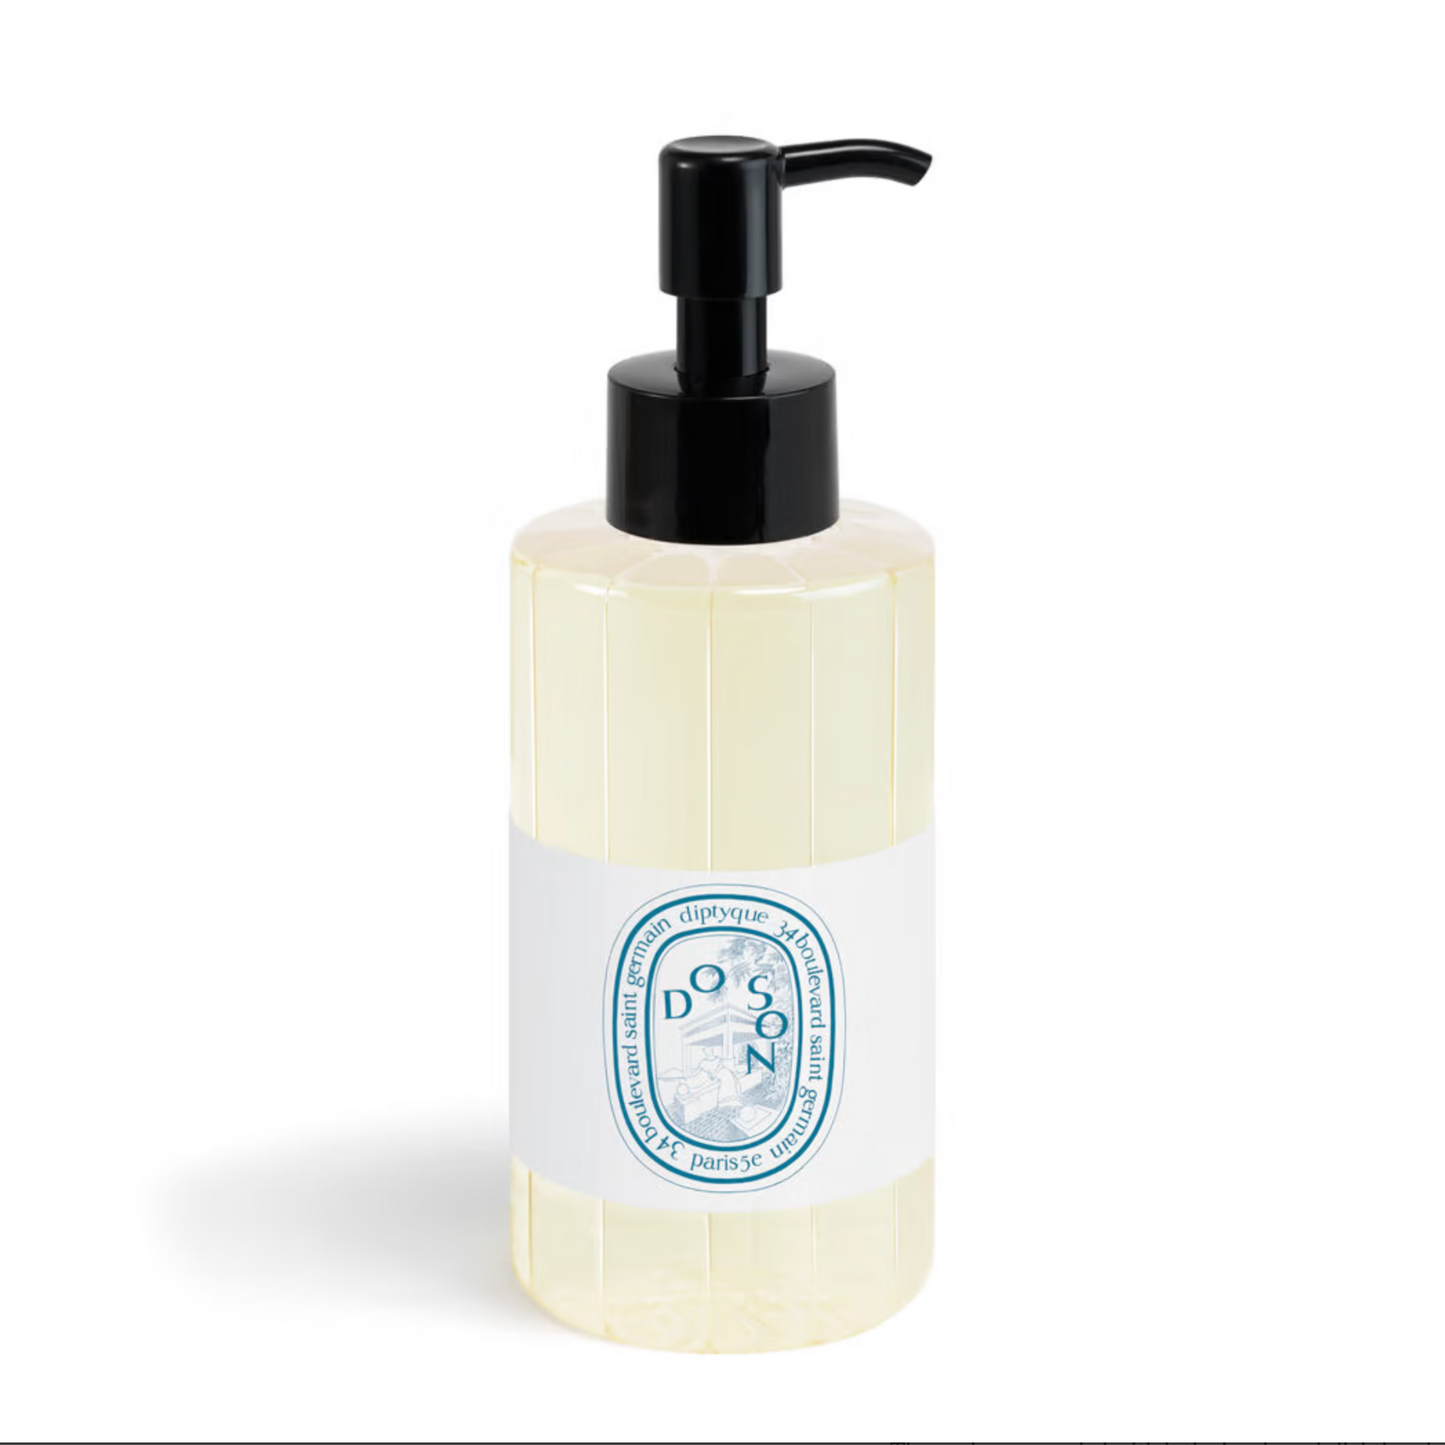 Diptyque - Do Son Cleansing Hand and Body Gel - LIMITED EDITION